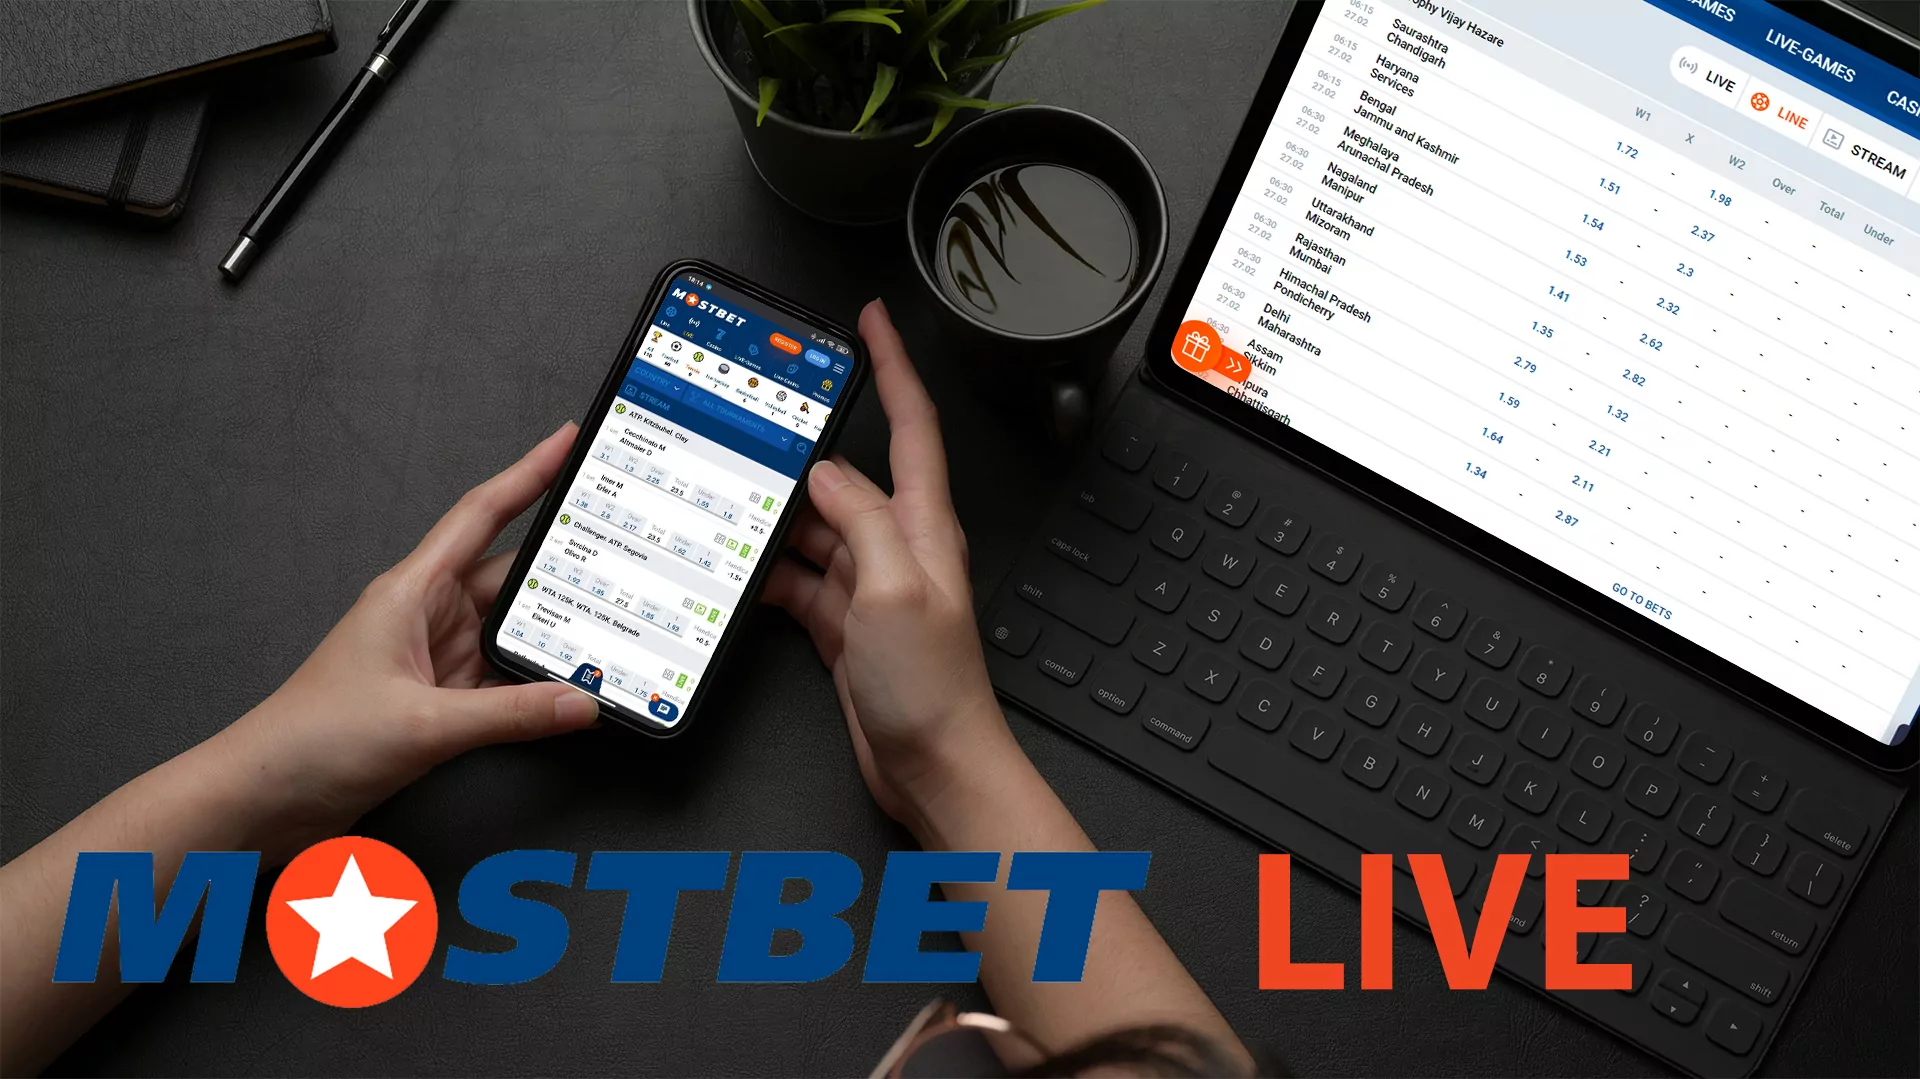 Live betting is also available in the Mostbet mobile application.